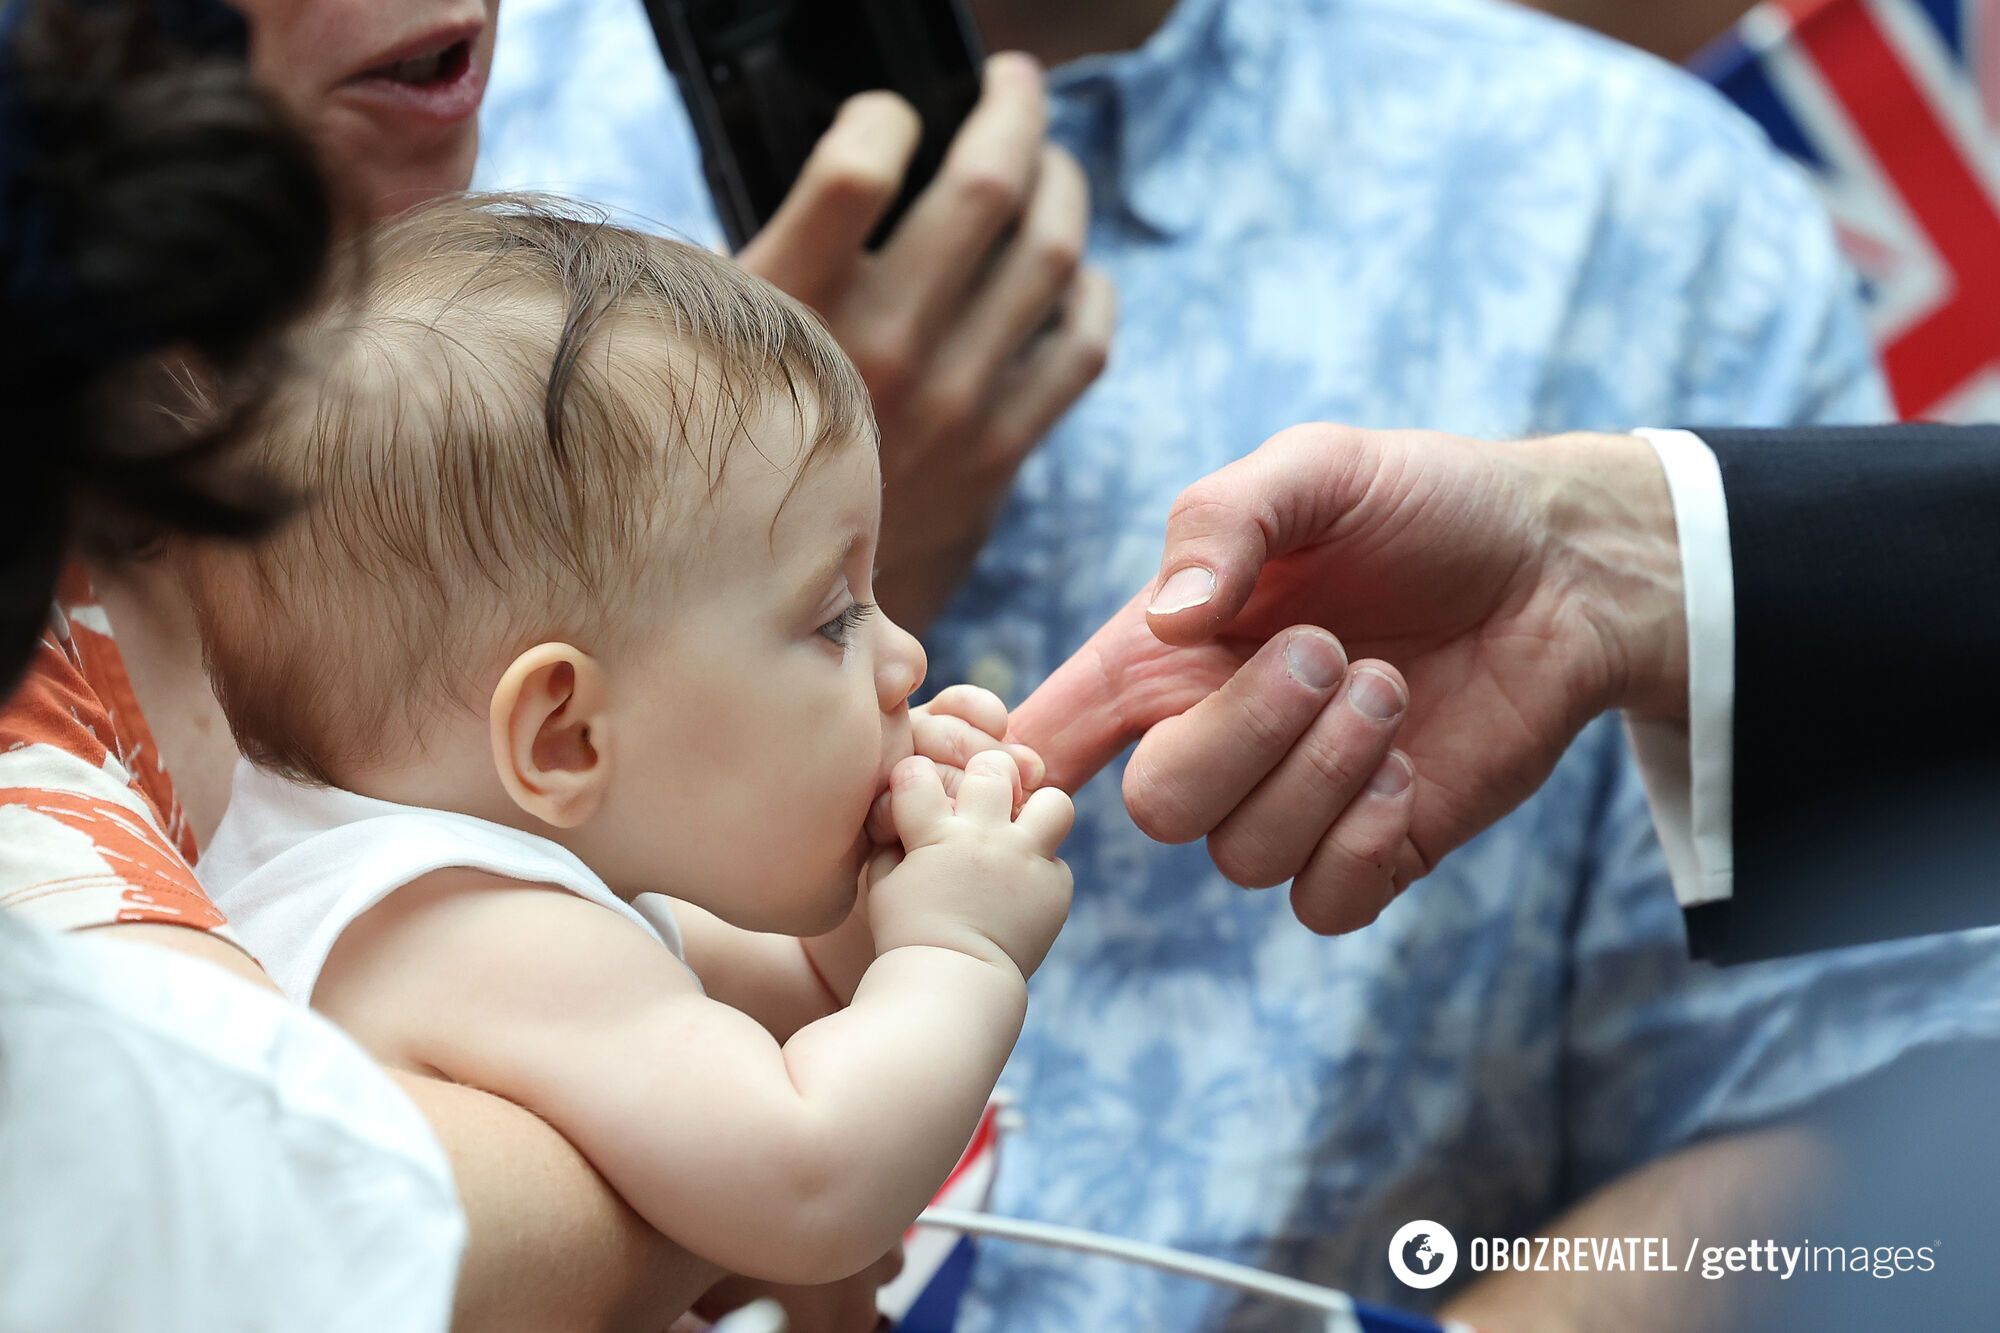 An eight-month-old baby bit Prince William's finger: a funny moment went viral